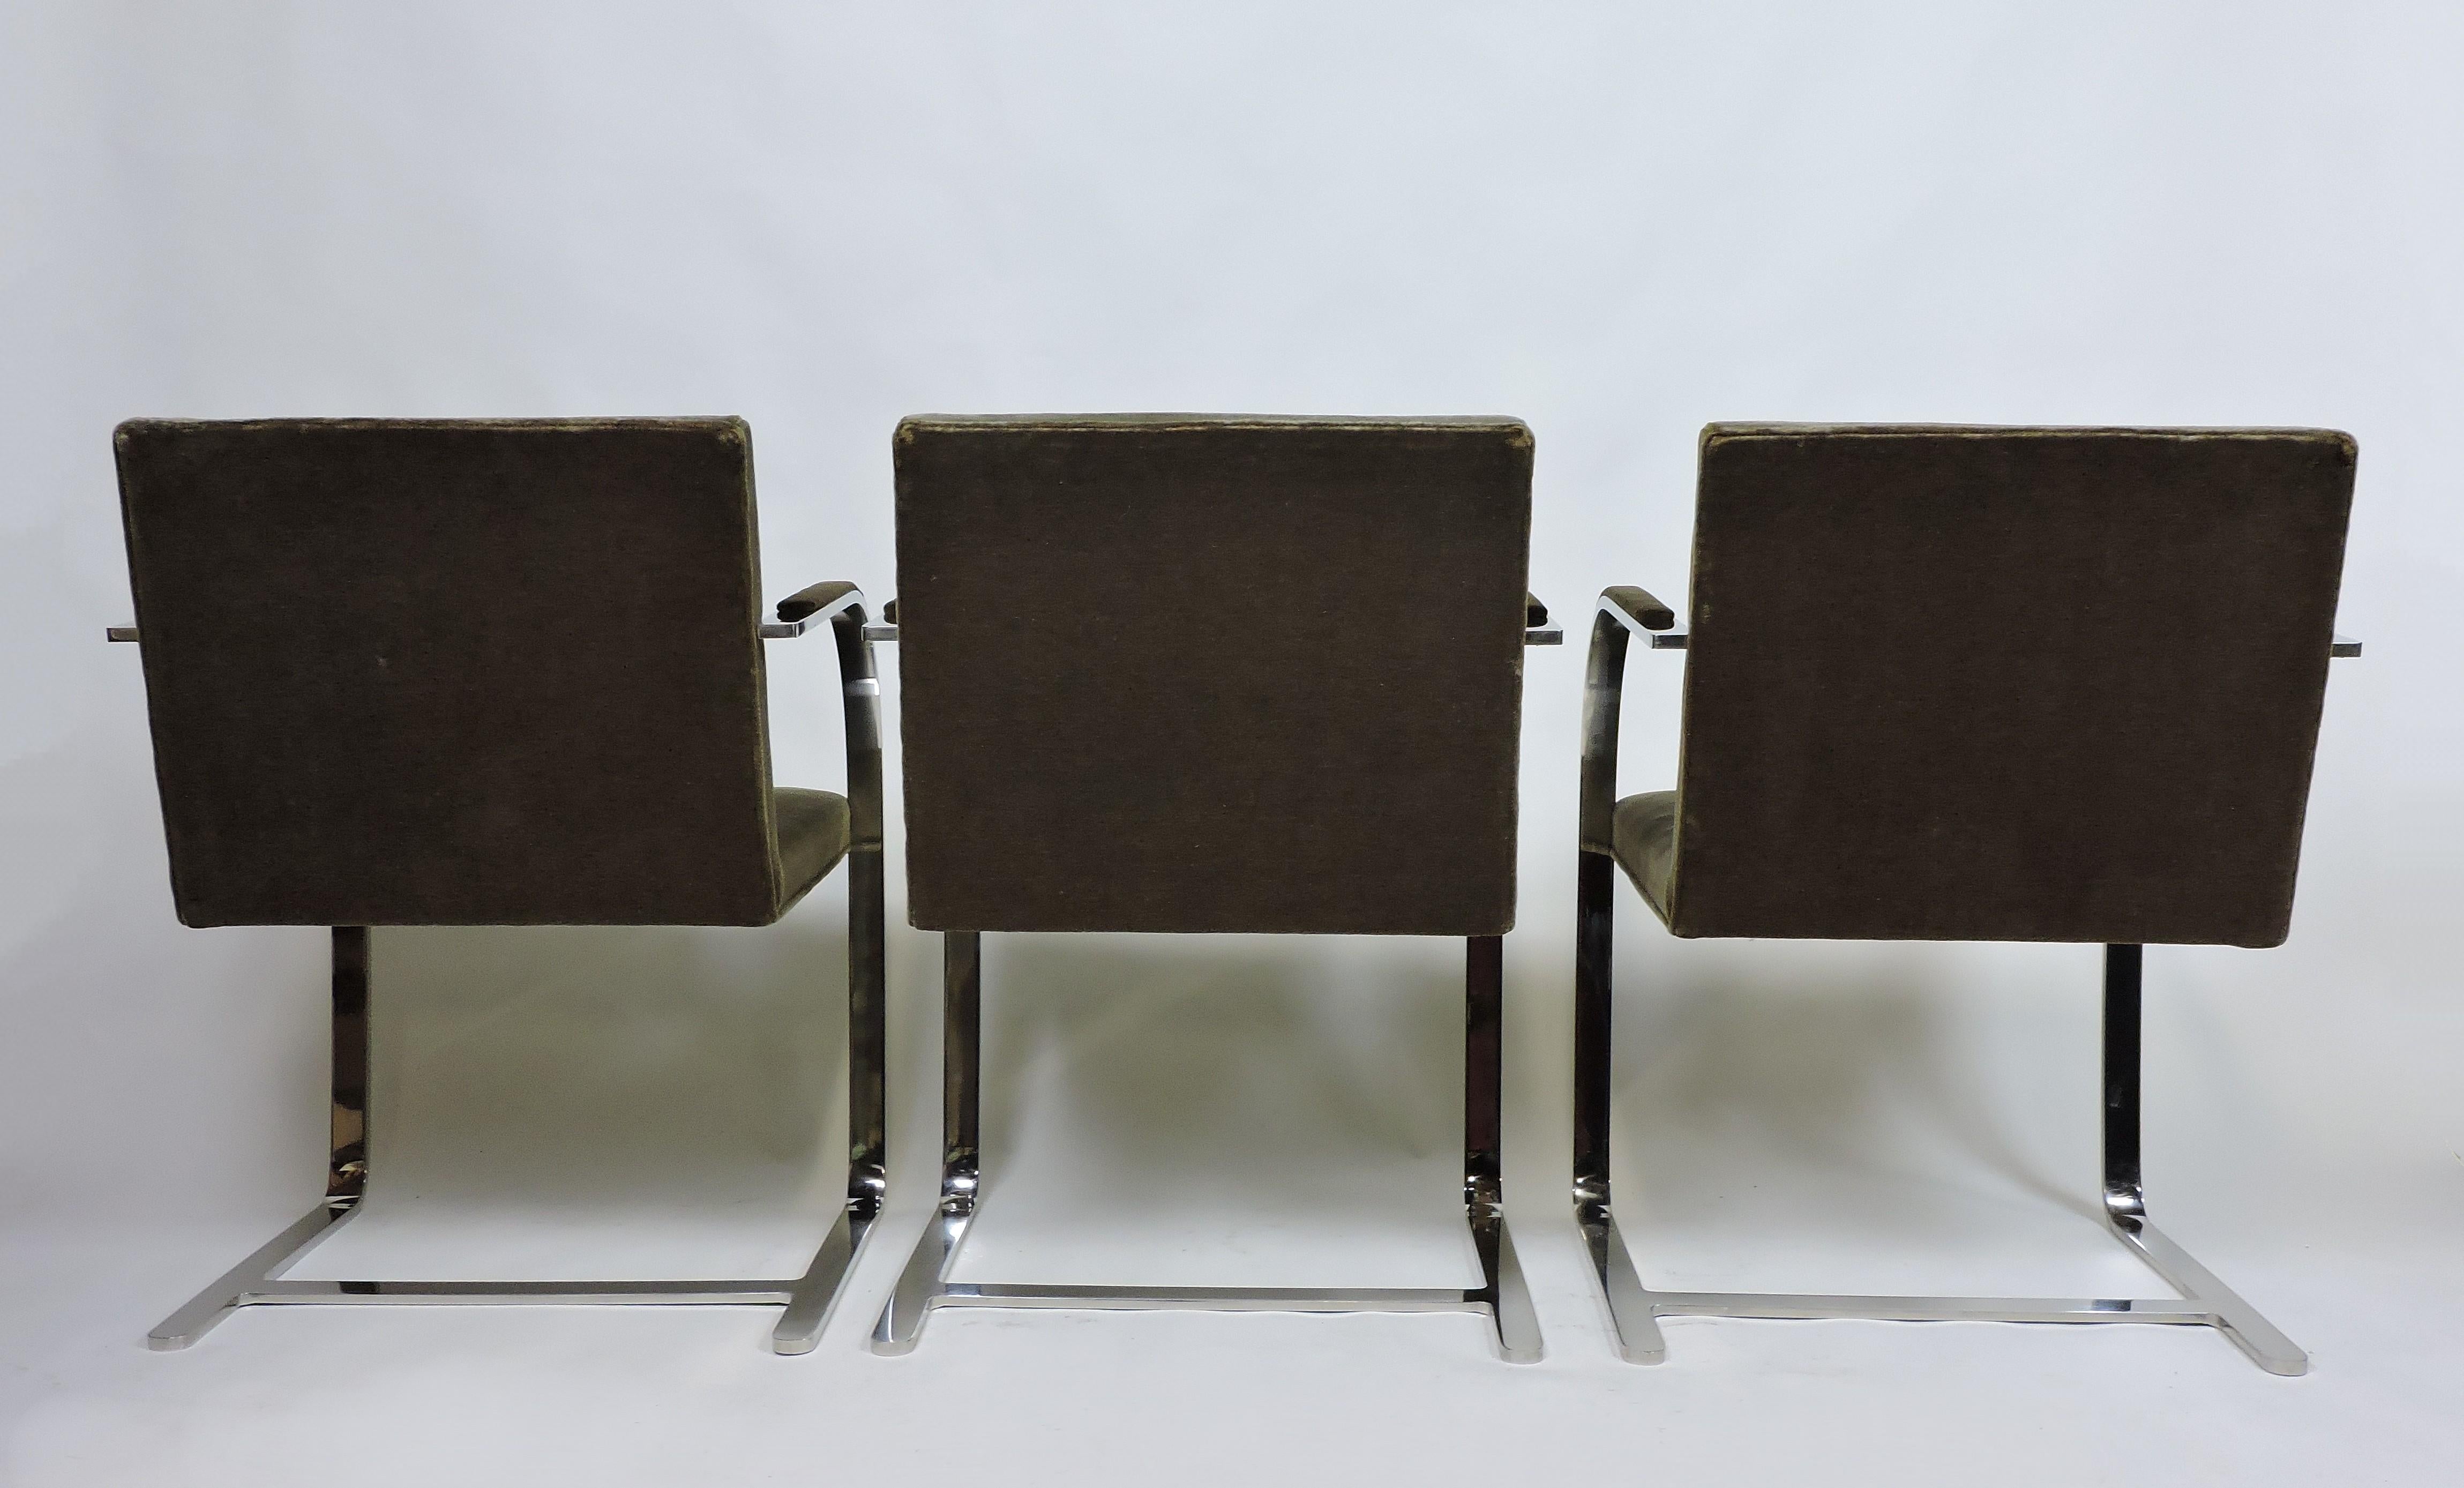 Mid-Century Modern Mies van der Rohe for Knoll Brno Flat Bar Stainless Steel Chair, 3 Available